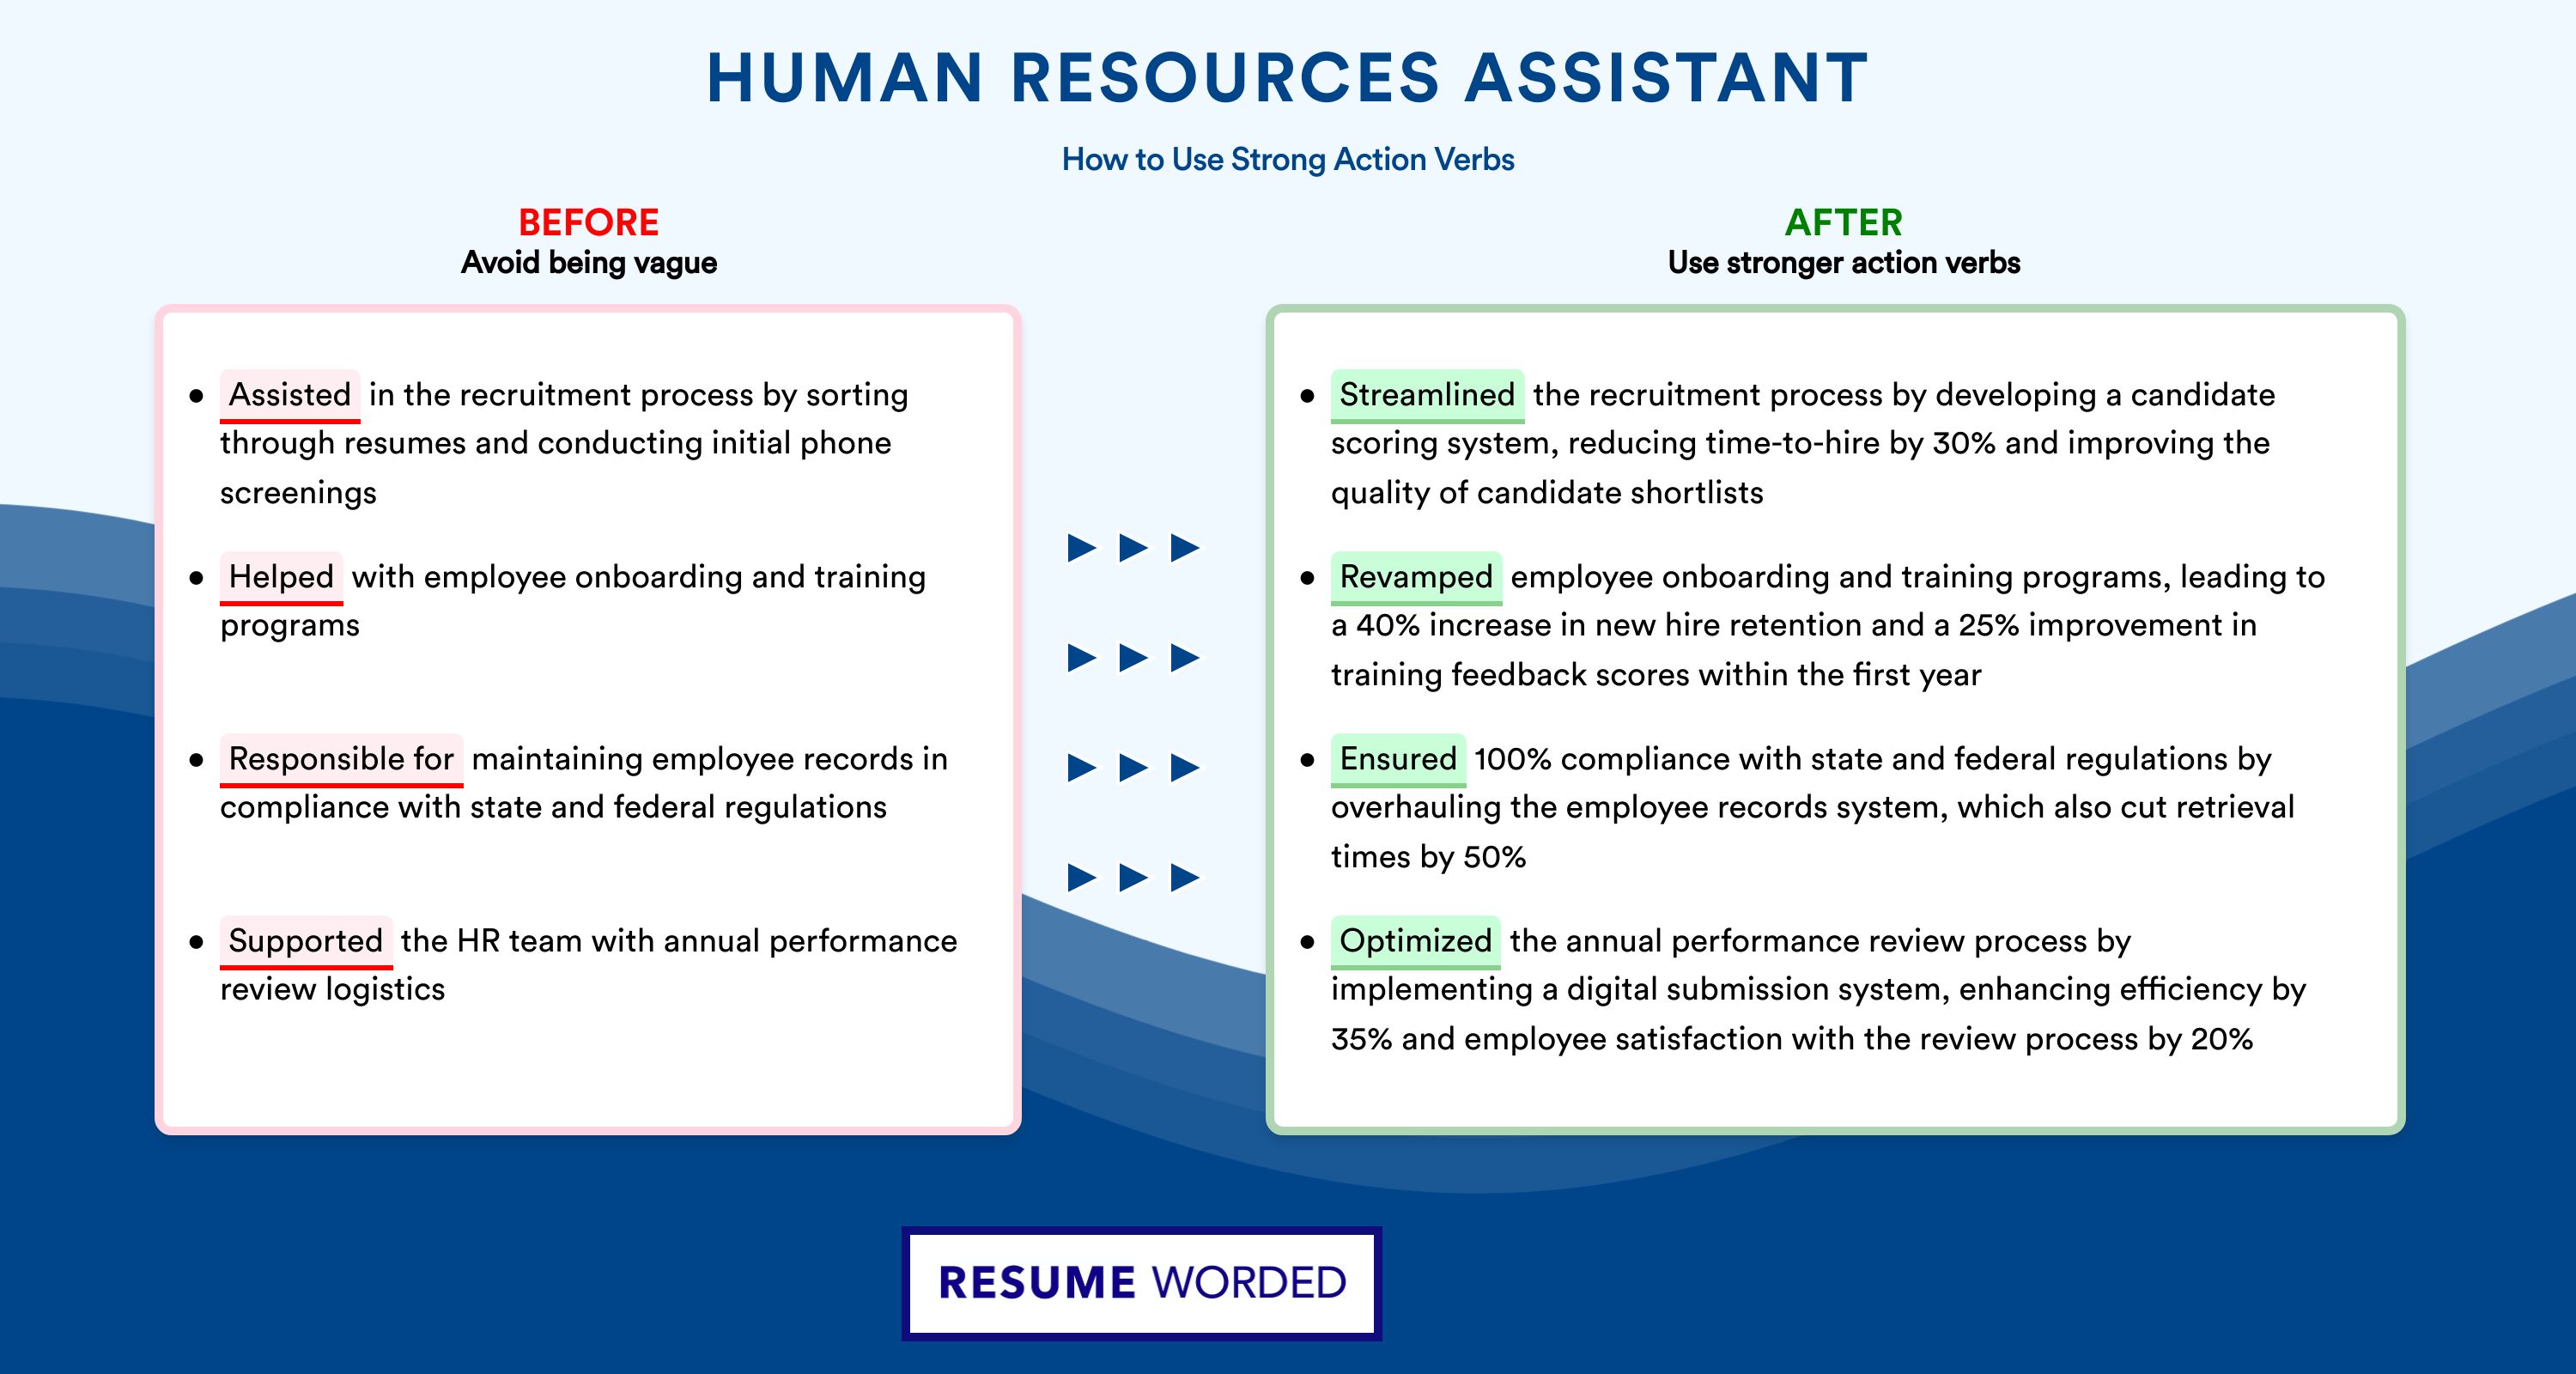 Action Verbs for Human Resources Assistant